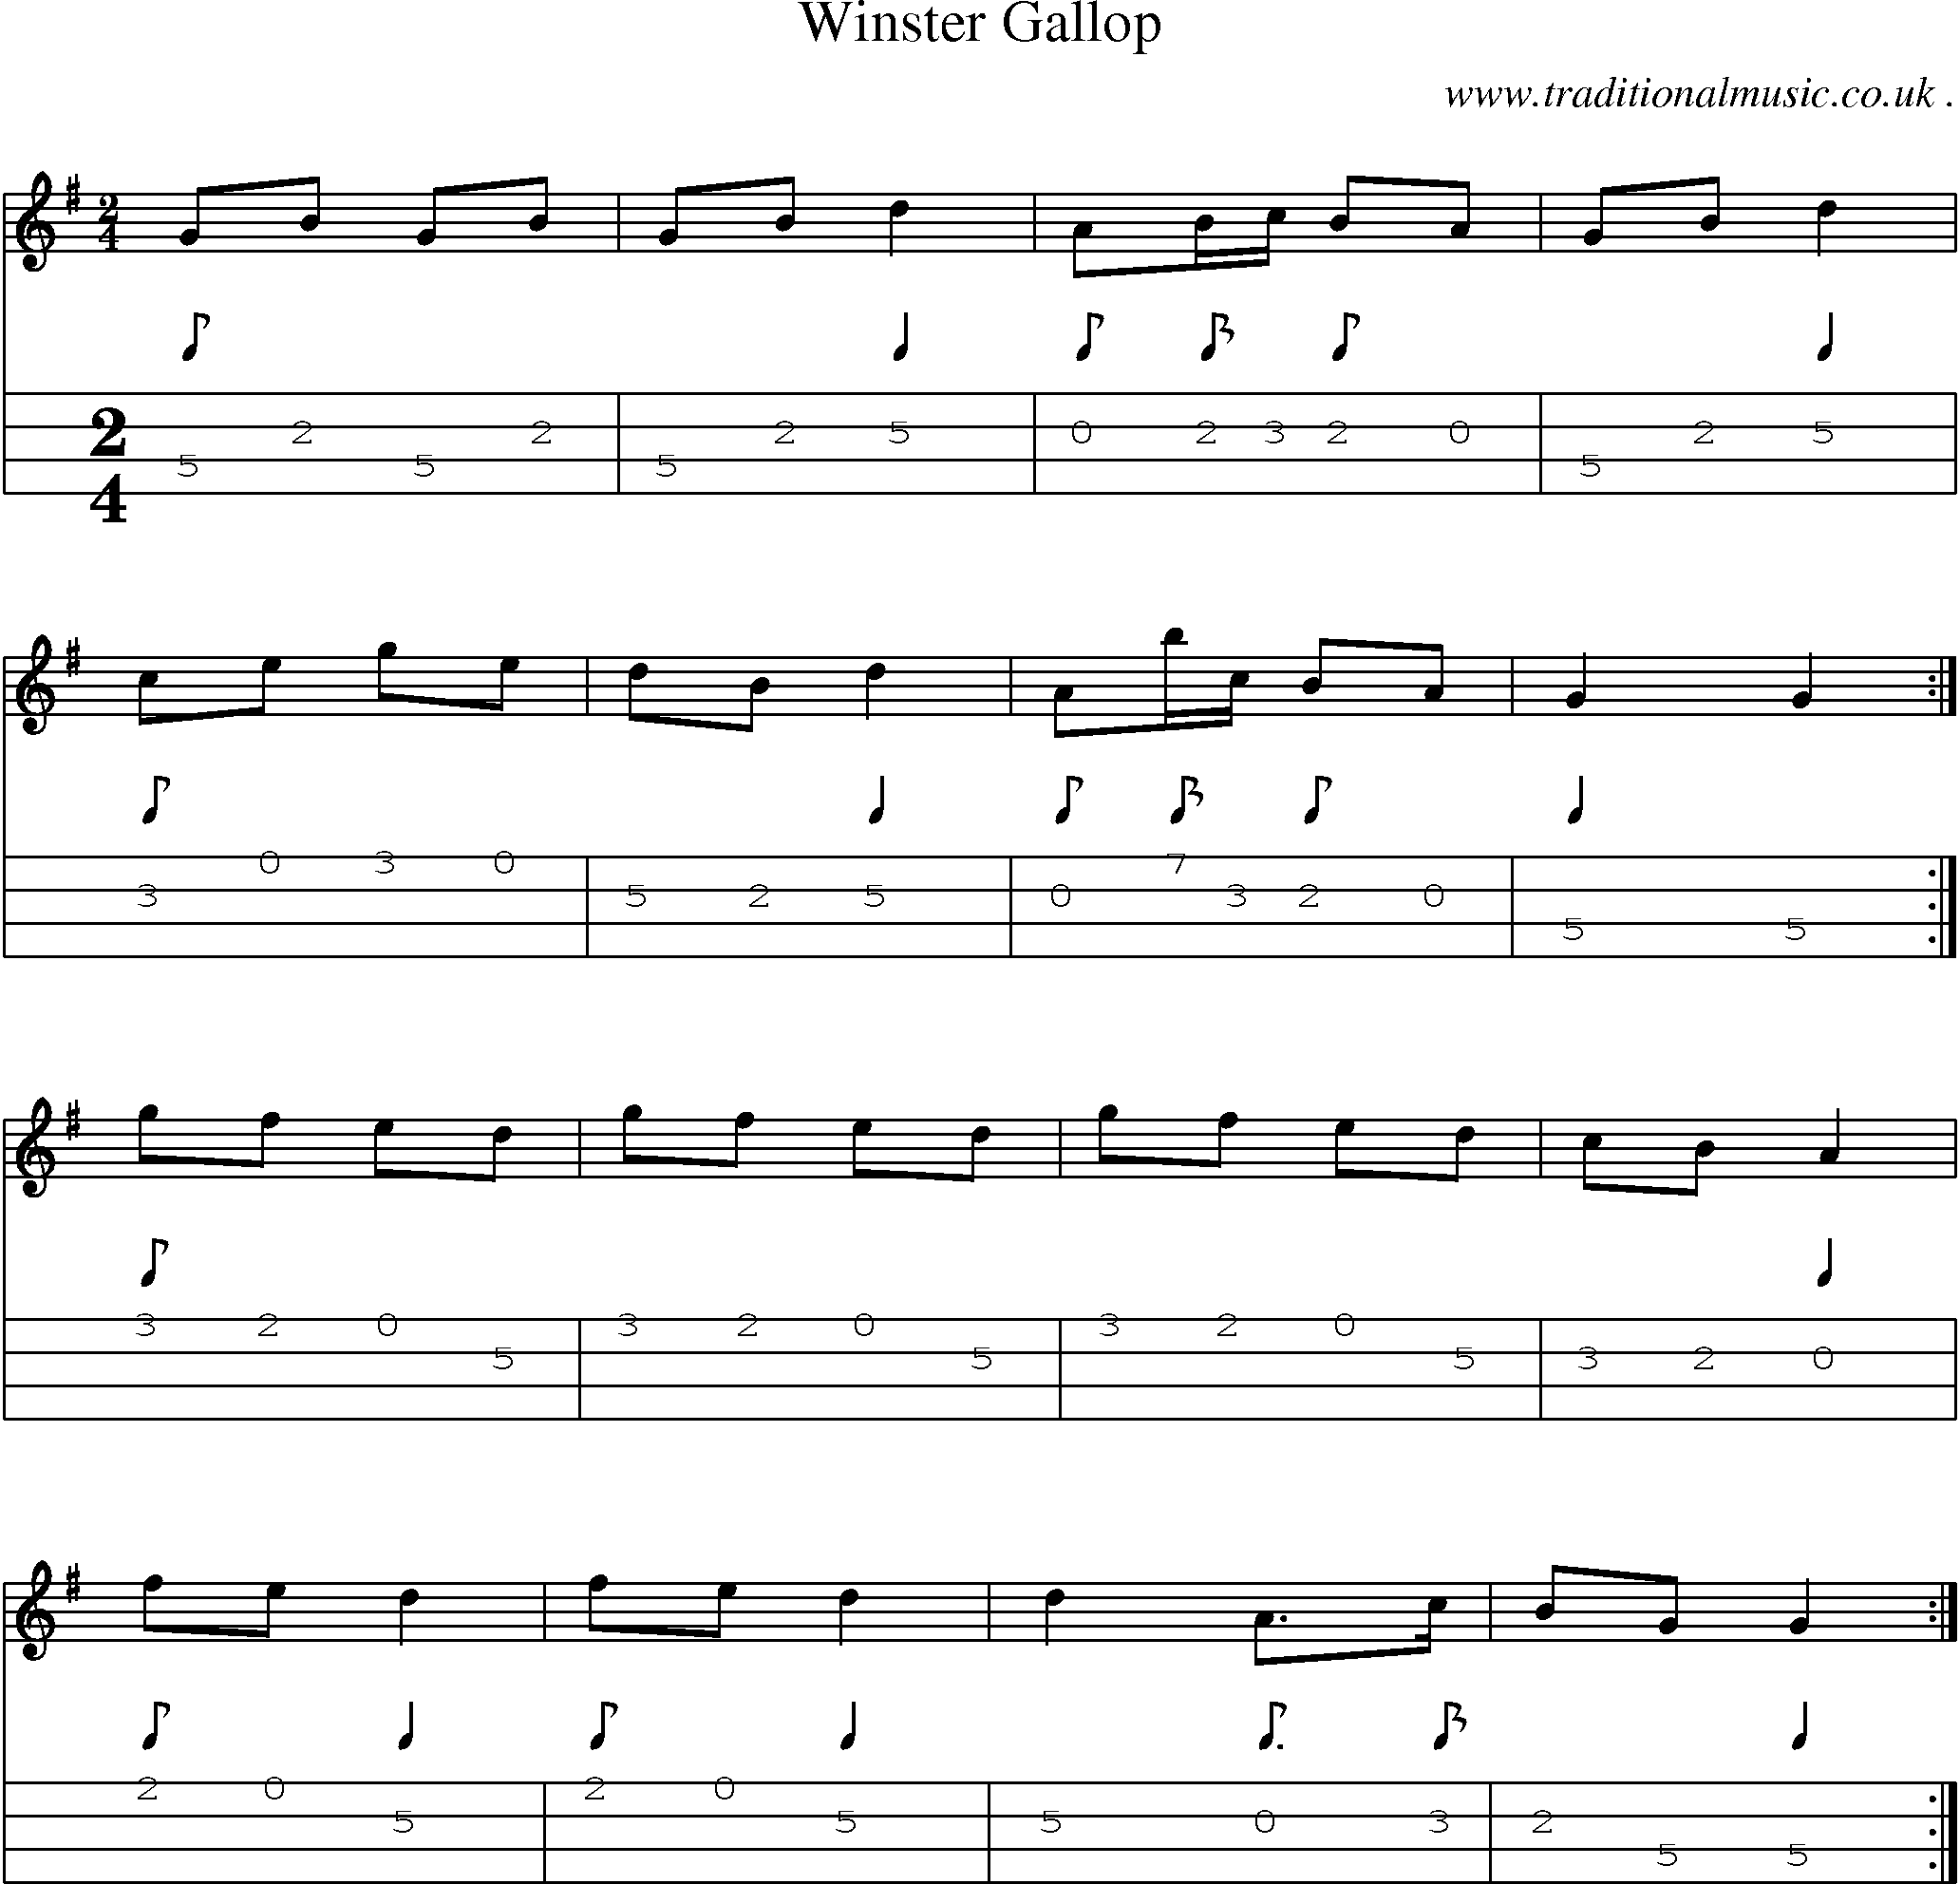 Sheet-music  score, Chords and Mandolin Tabs for Winster Gallop